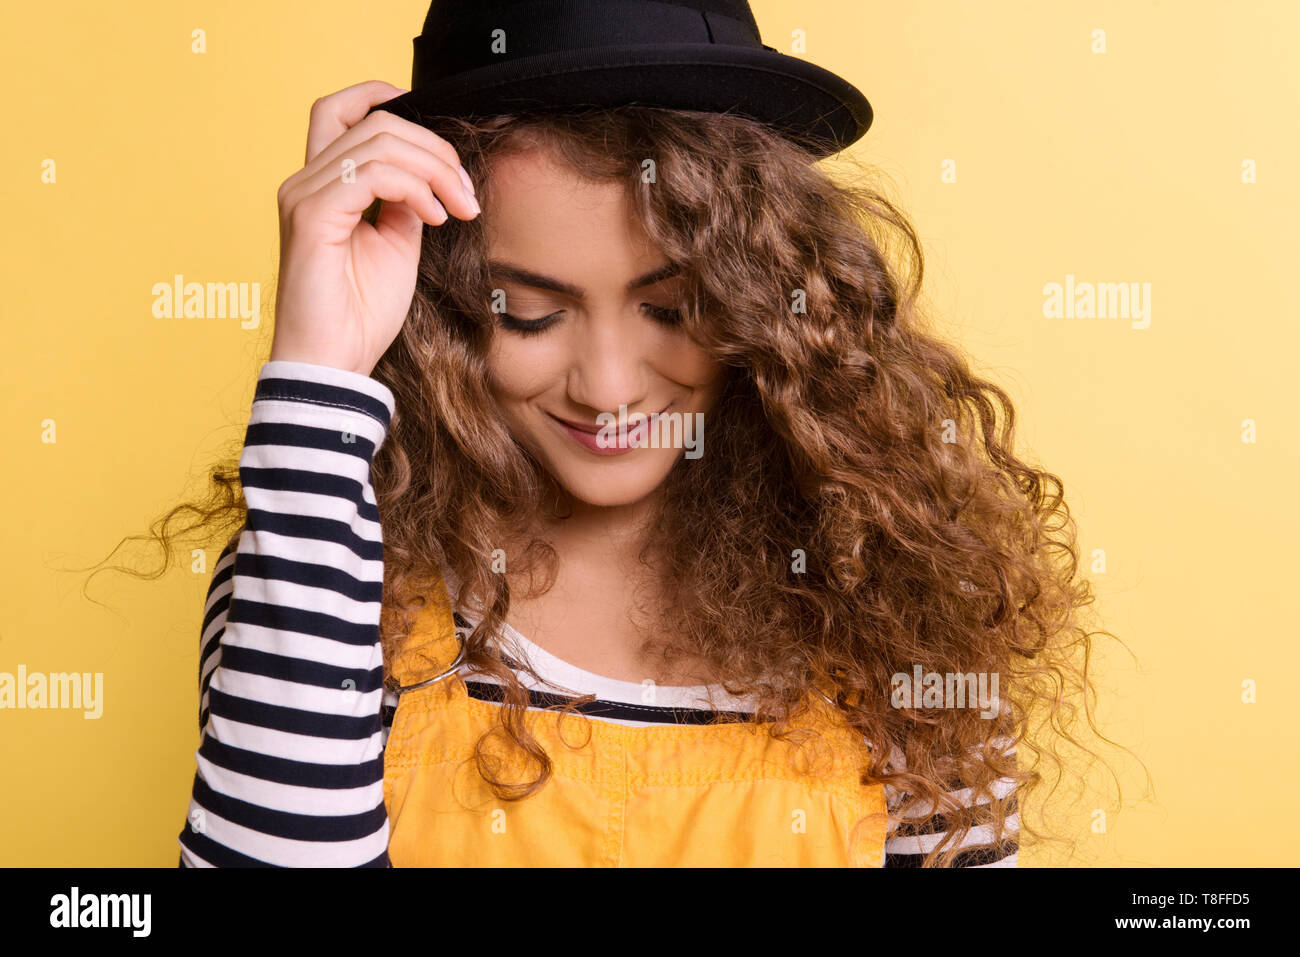 Portrait of a young woman with black hat in a studio on a yellow background. Stock Photo